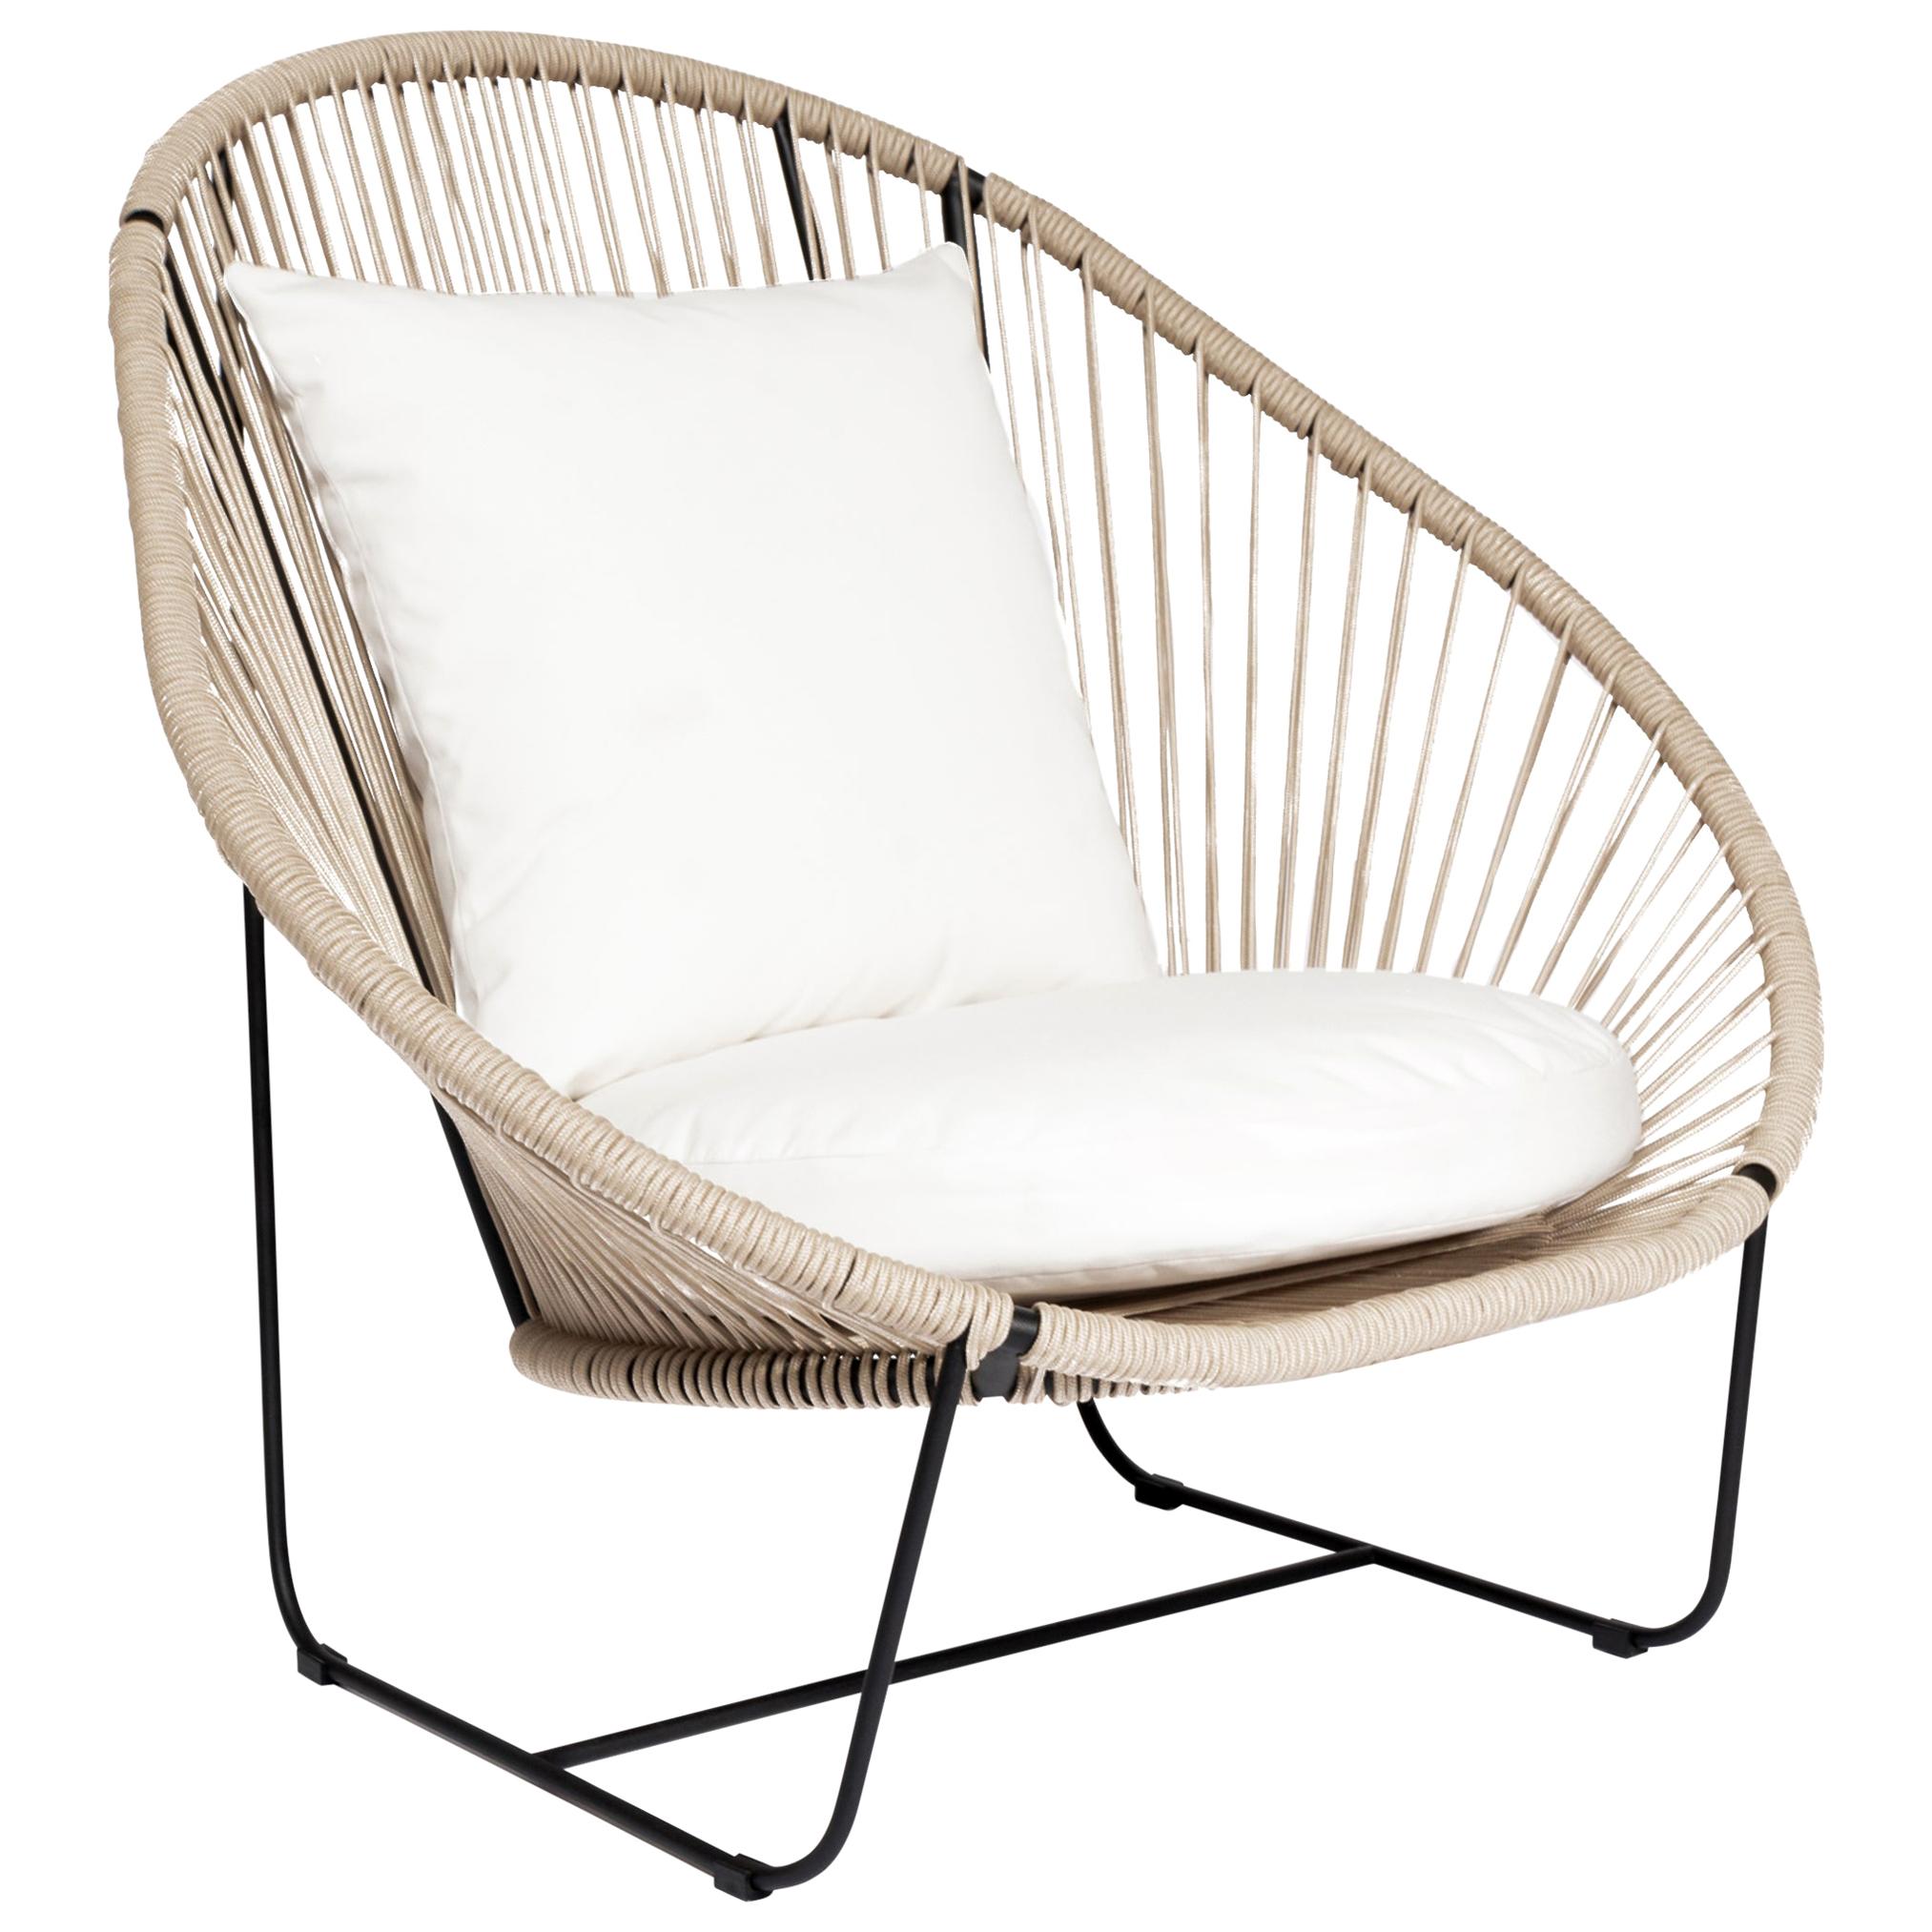 Arena Steel with Rope Weave Armchair